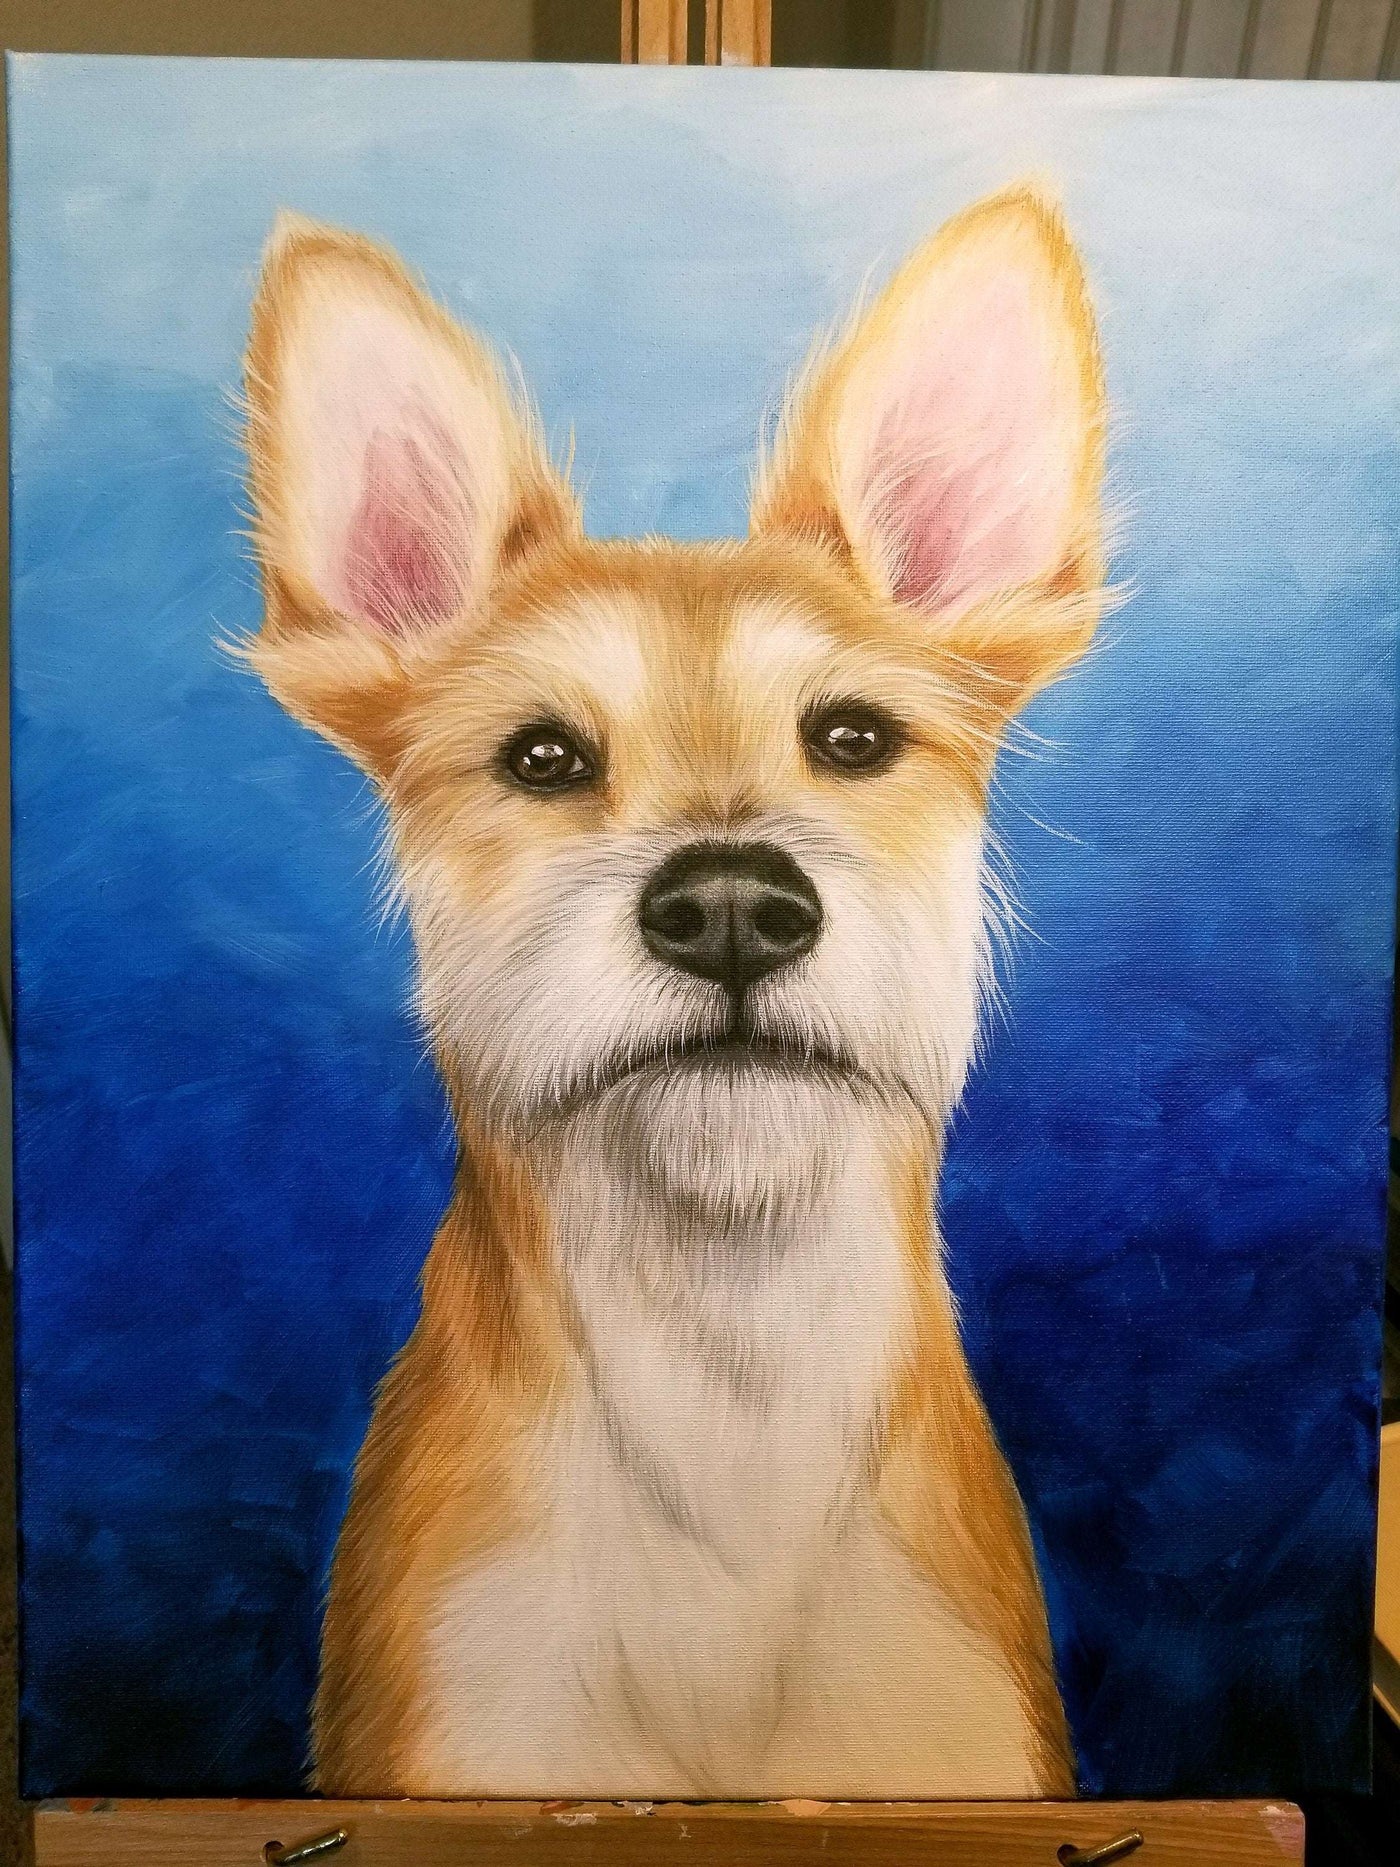 Acrylic pet portrait painting of a brown and white dog against a blue backdrop, presented on an easel.